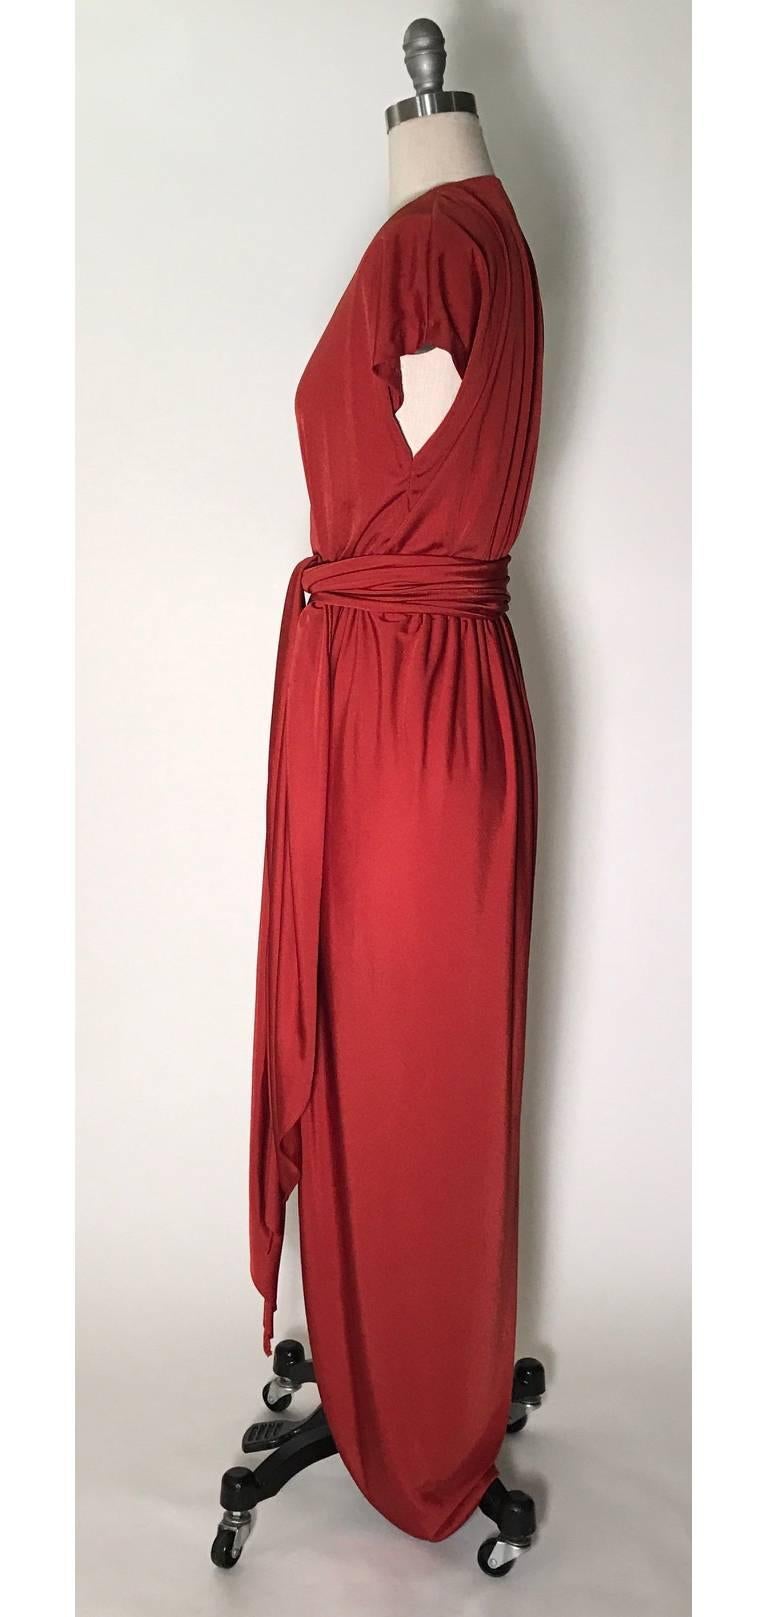 Halston IV vintage jersey wrap dress in rust red from Halston's 1980's licensed collection for Dorian. V-neck and short sleeves. Elastic waist fastens with two hook and eye closures. Removable long wide belt presents many styling possibilities!